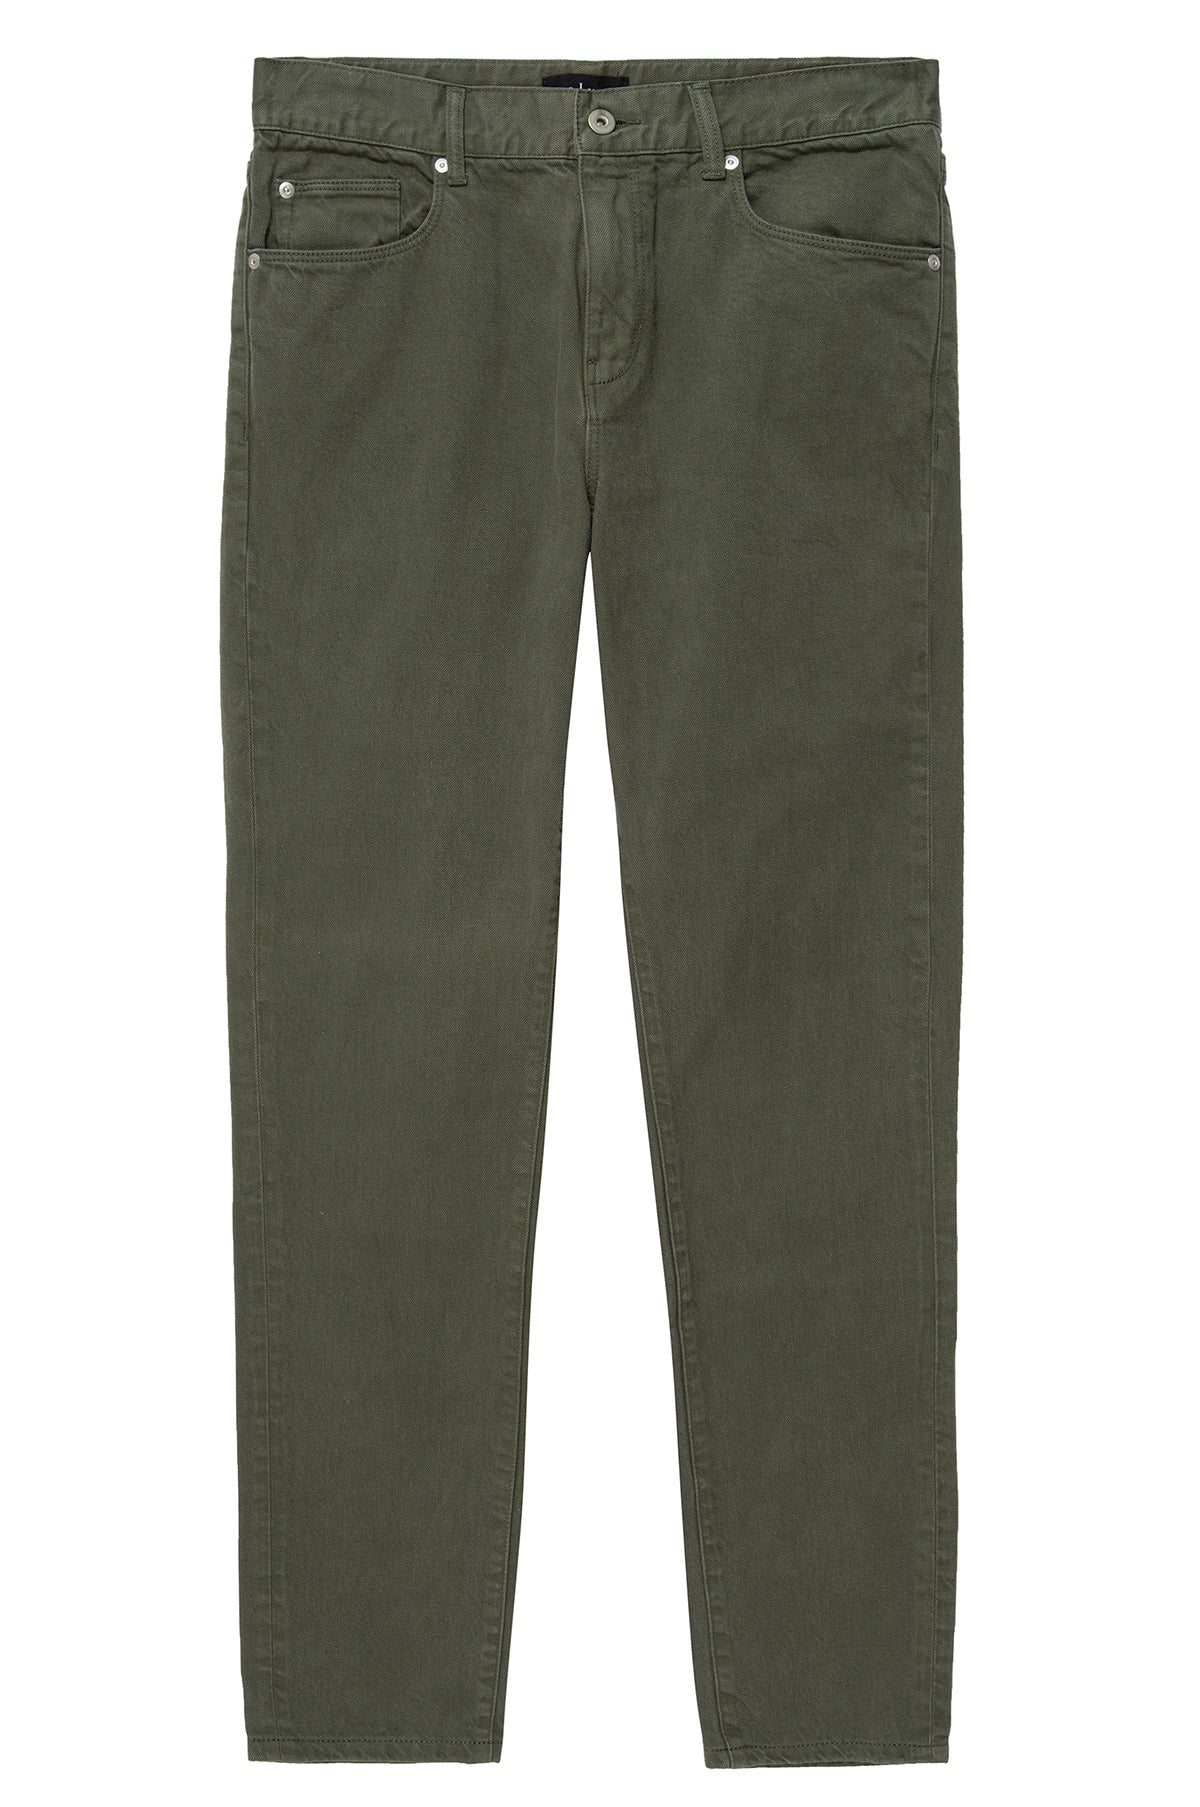 A pair of men's JOSEPH COTTON CANVAS PANT pants by Velvet by Graham & Spencer in olive green.-26022595985601